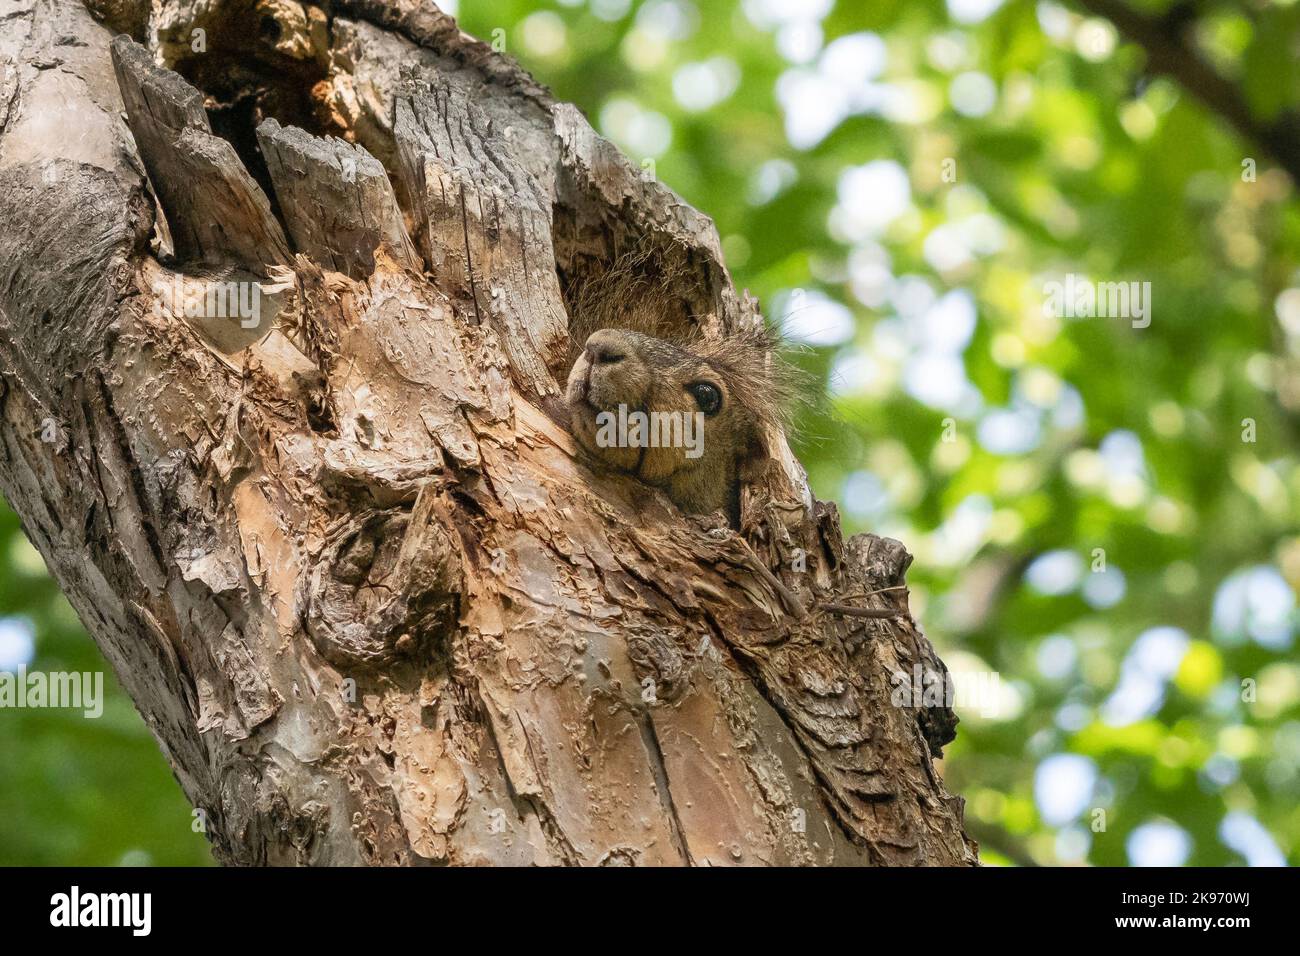 A Fox Squirrel tucked inside a tree cavity sticks its nose and head out. Stock Photo